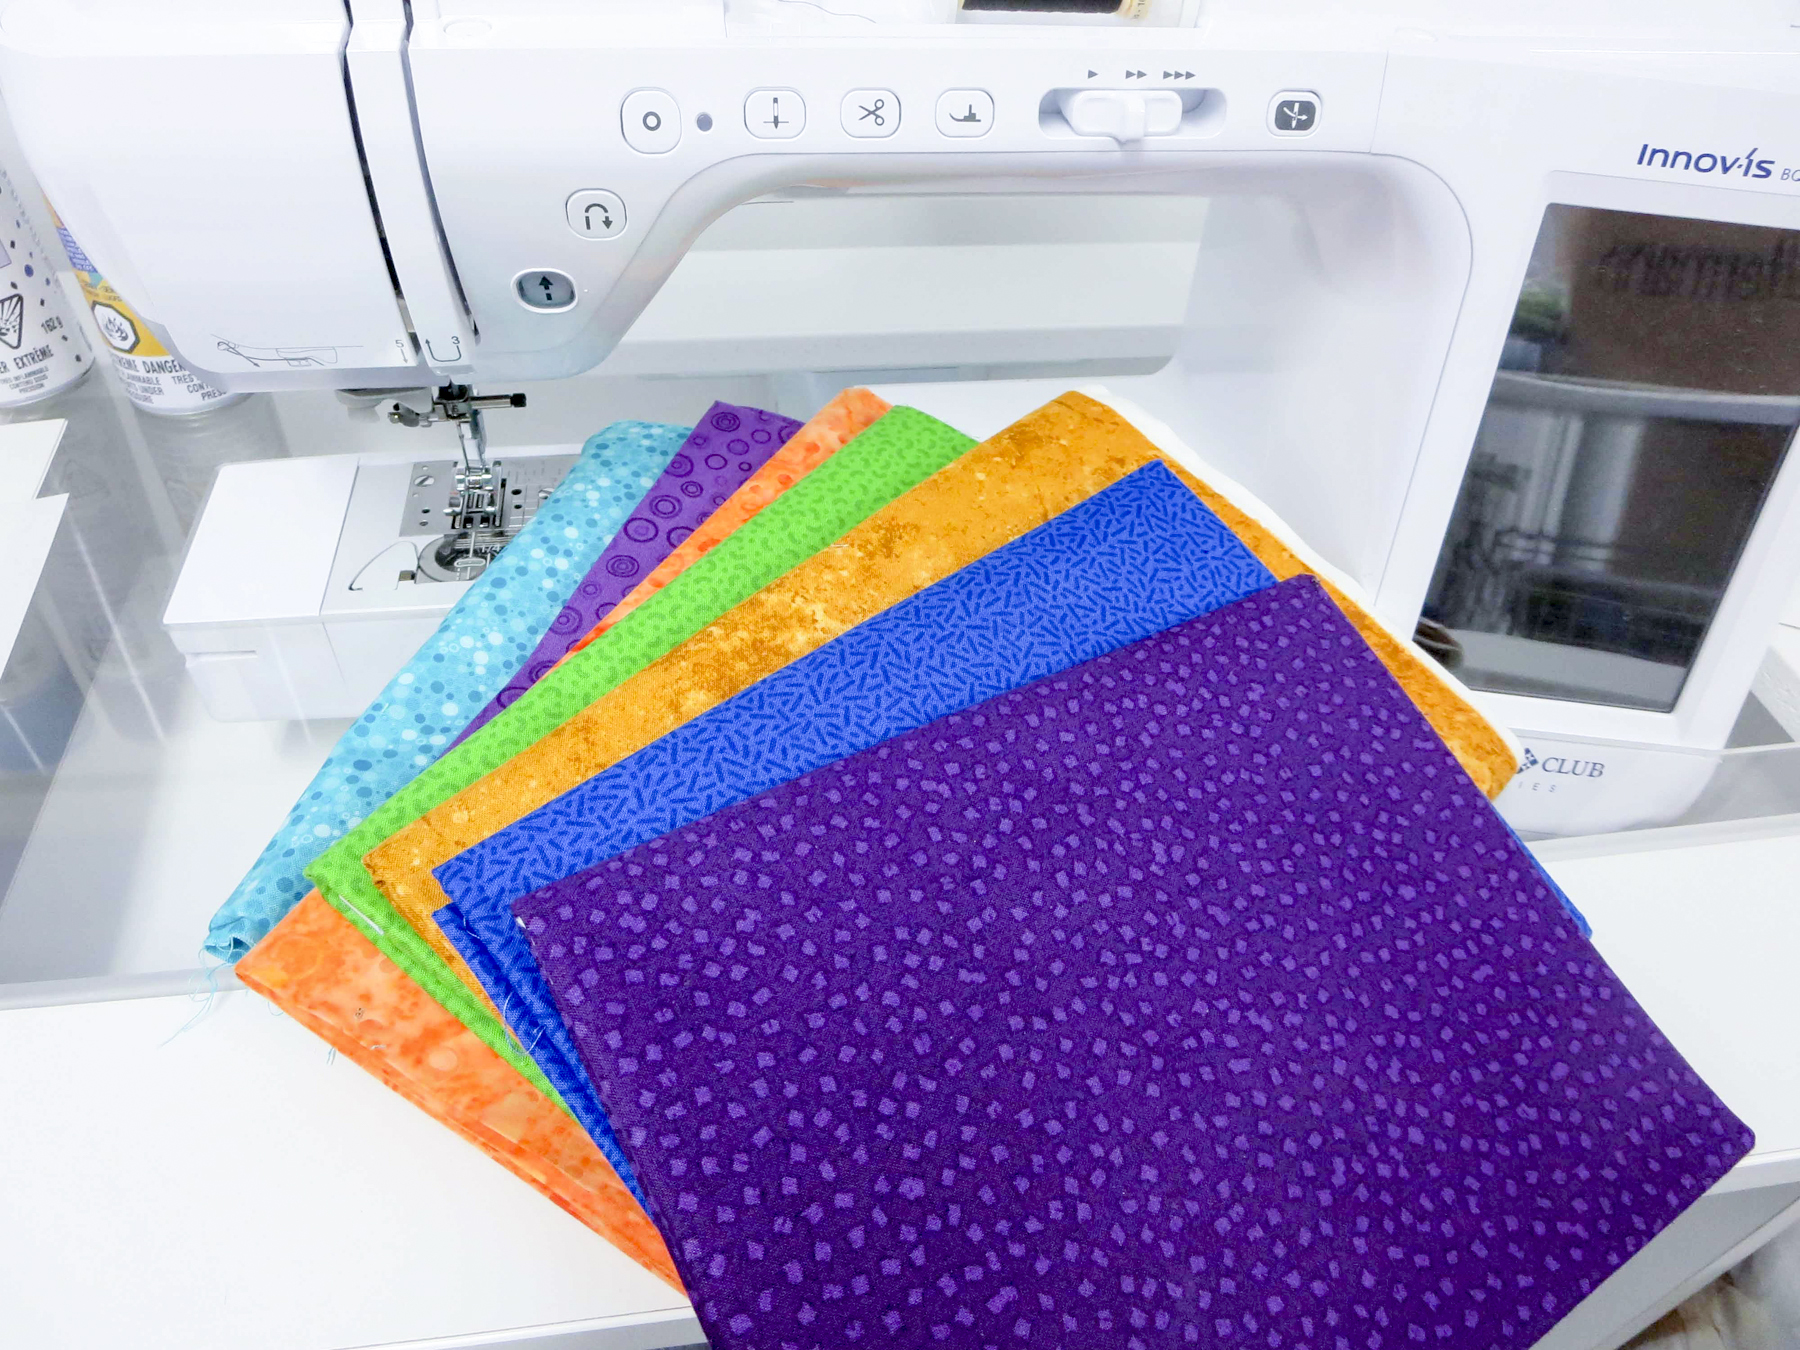 Purple, blue, orange, green, and turquoise cotton fabrics for the wall quilt lay on a white sewing machine.